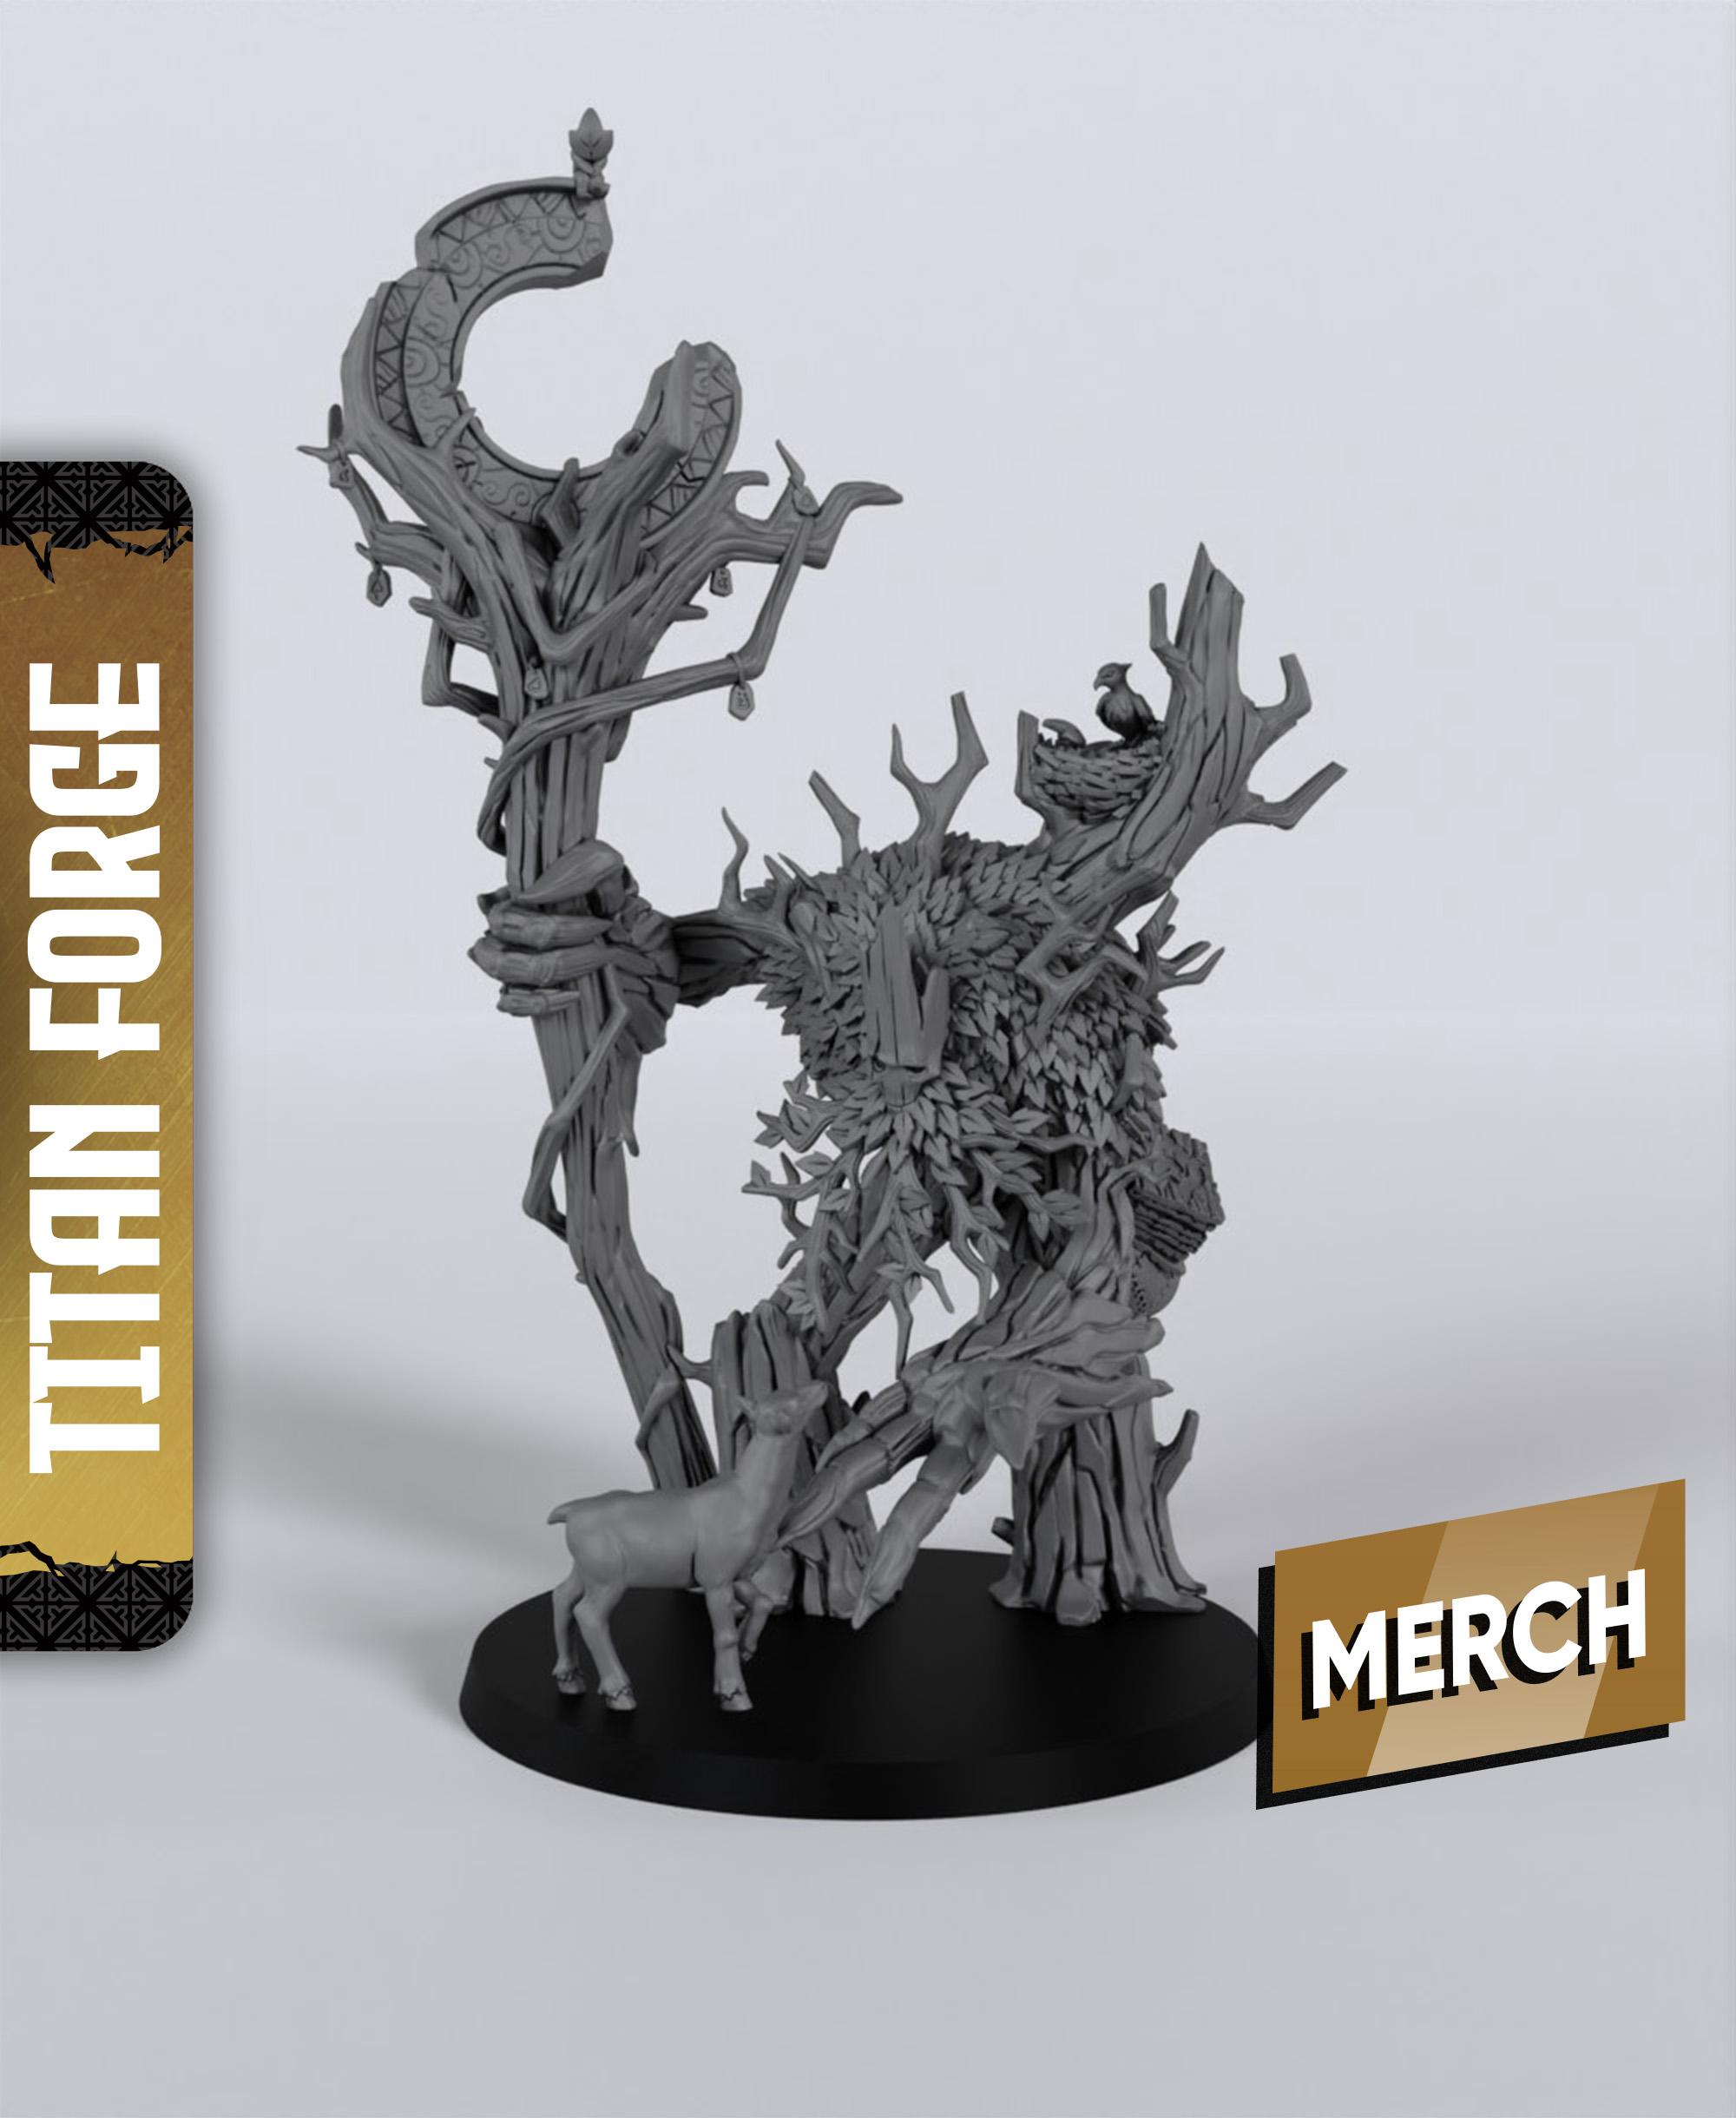 Thicket Shepherd - With Free Dragon Warhammer - 5e DnD Inspired for RPG and Wargamers 3d model